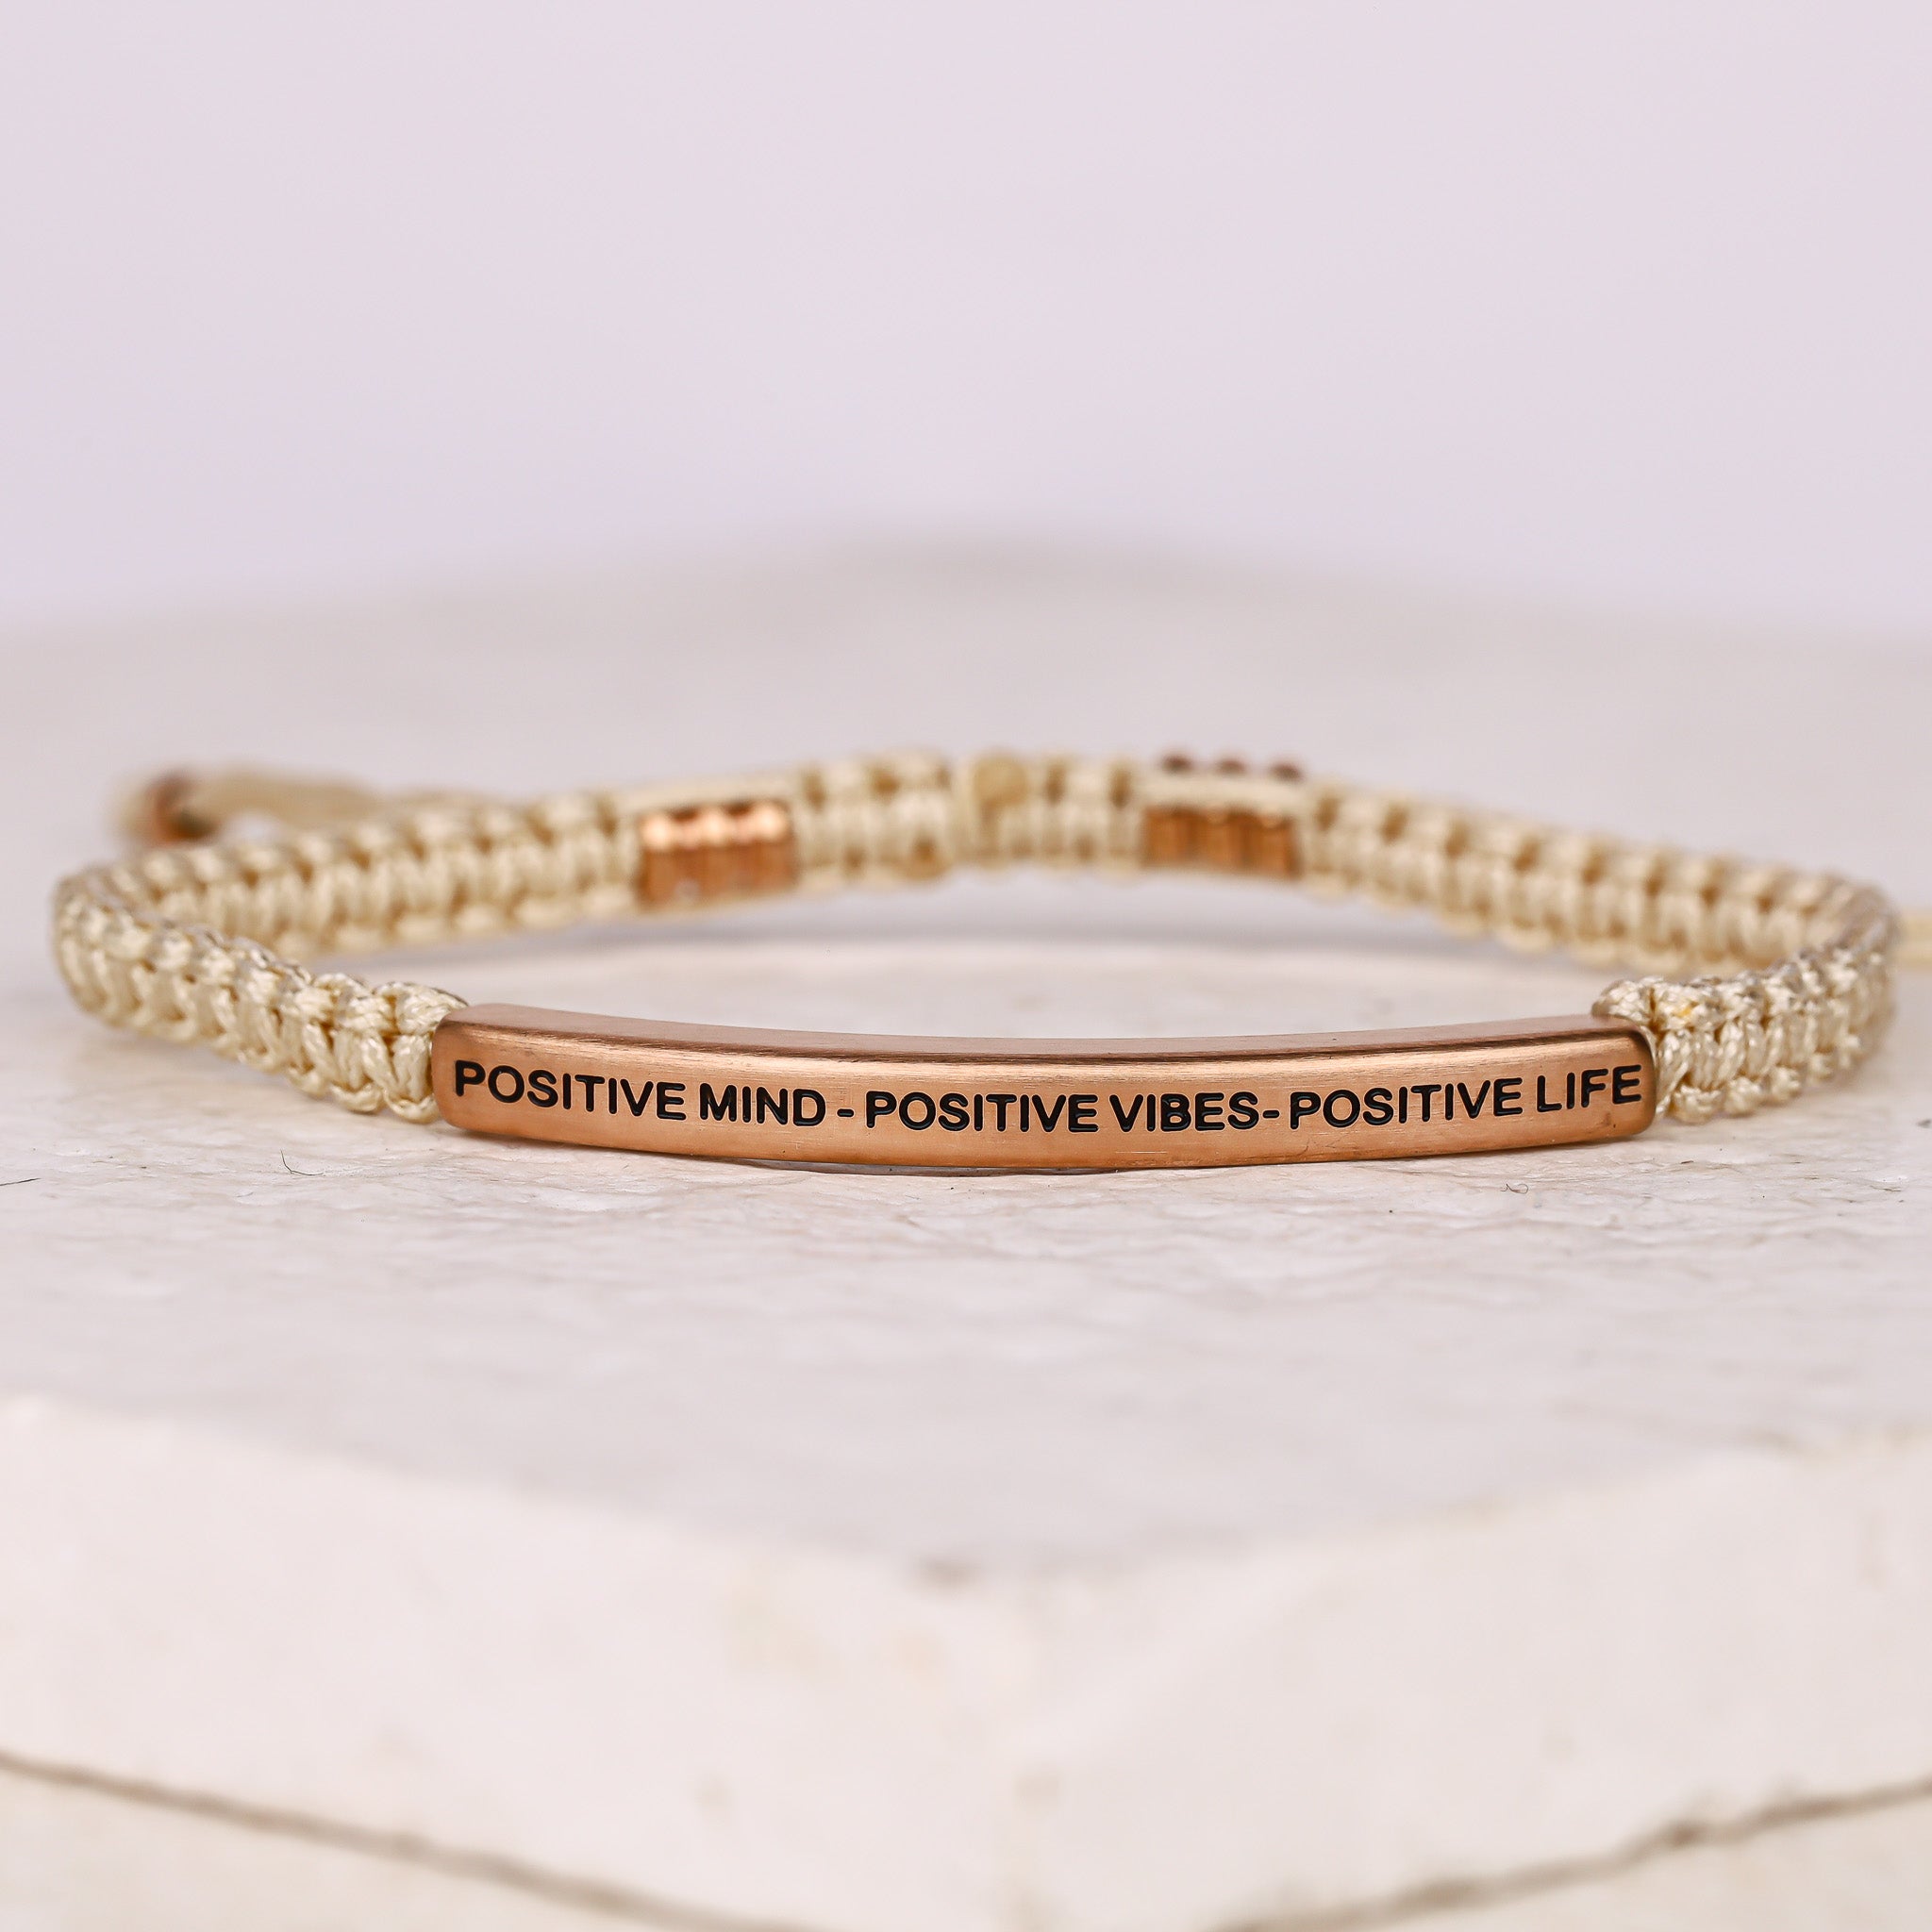 Rock Your Worth Radiate Positive Vibes Intention Band, Rose Gold Cuff  Bracelet - Rock Your Worth